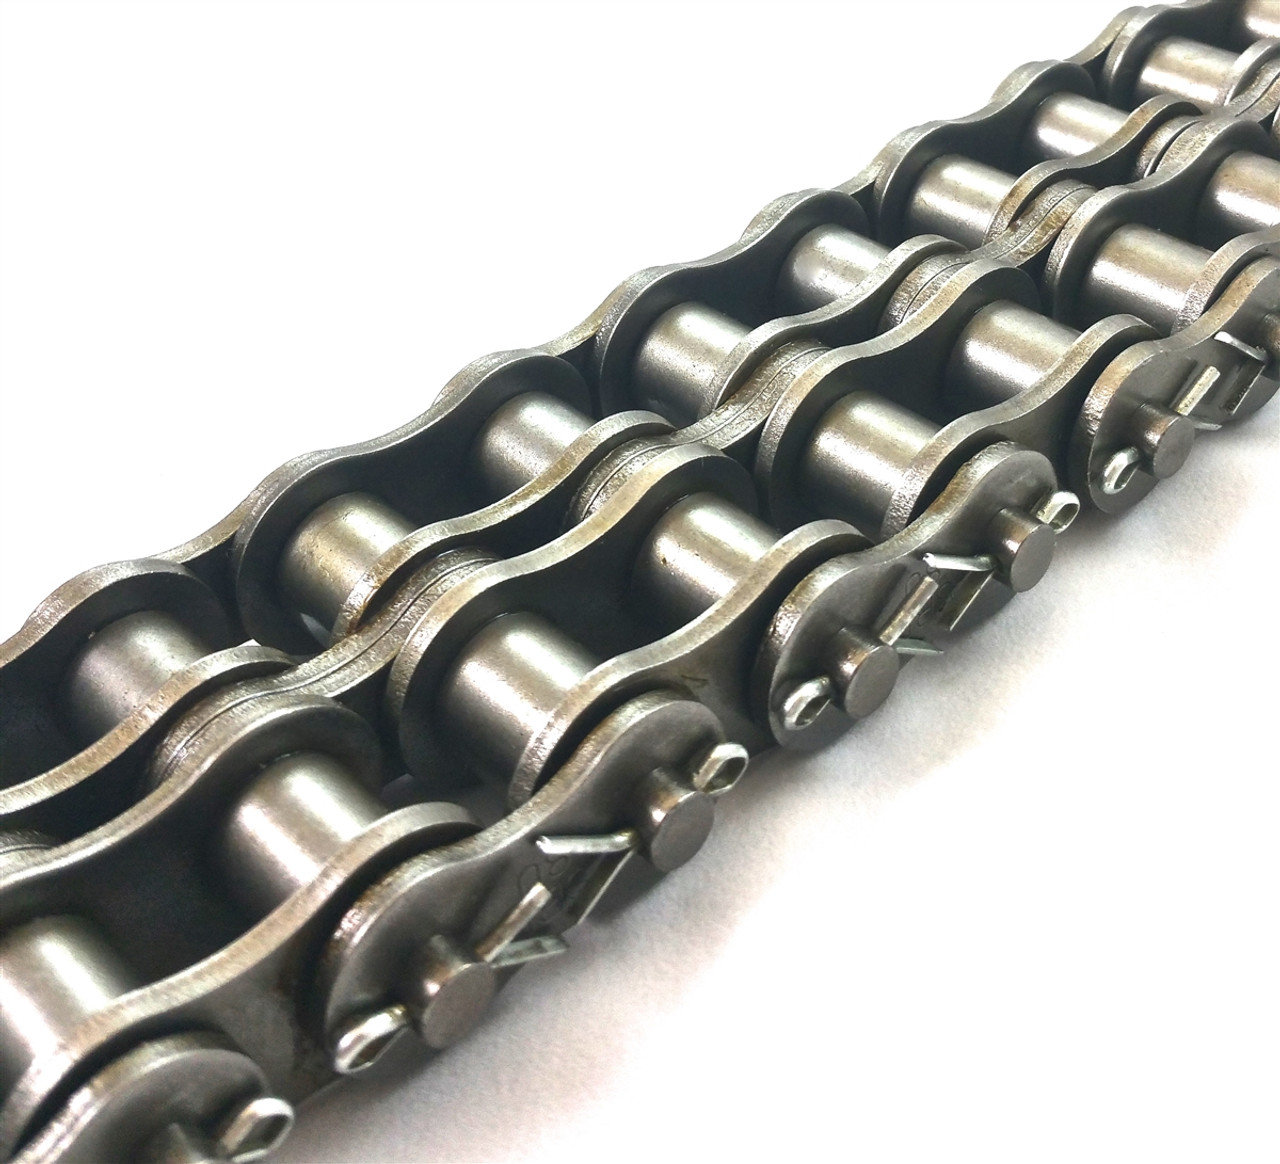 Heavy Cottered Roller Chain w/Hardened Pins - Two Row - 10' Box  DRV-140HZ-2C-10FT